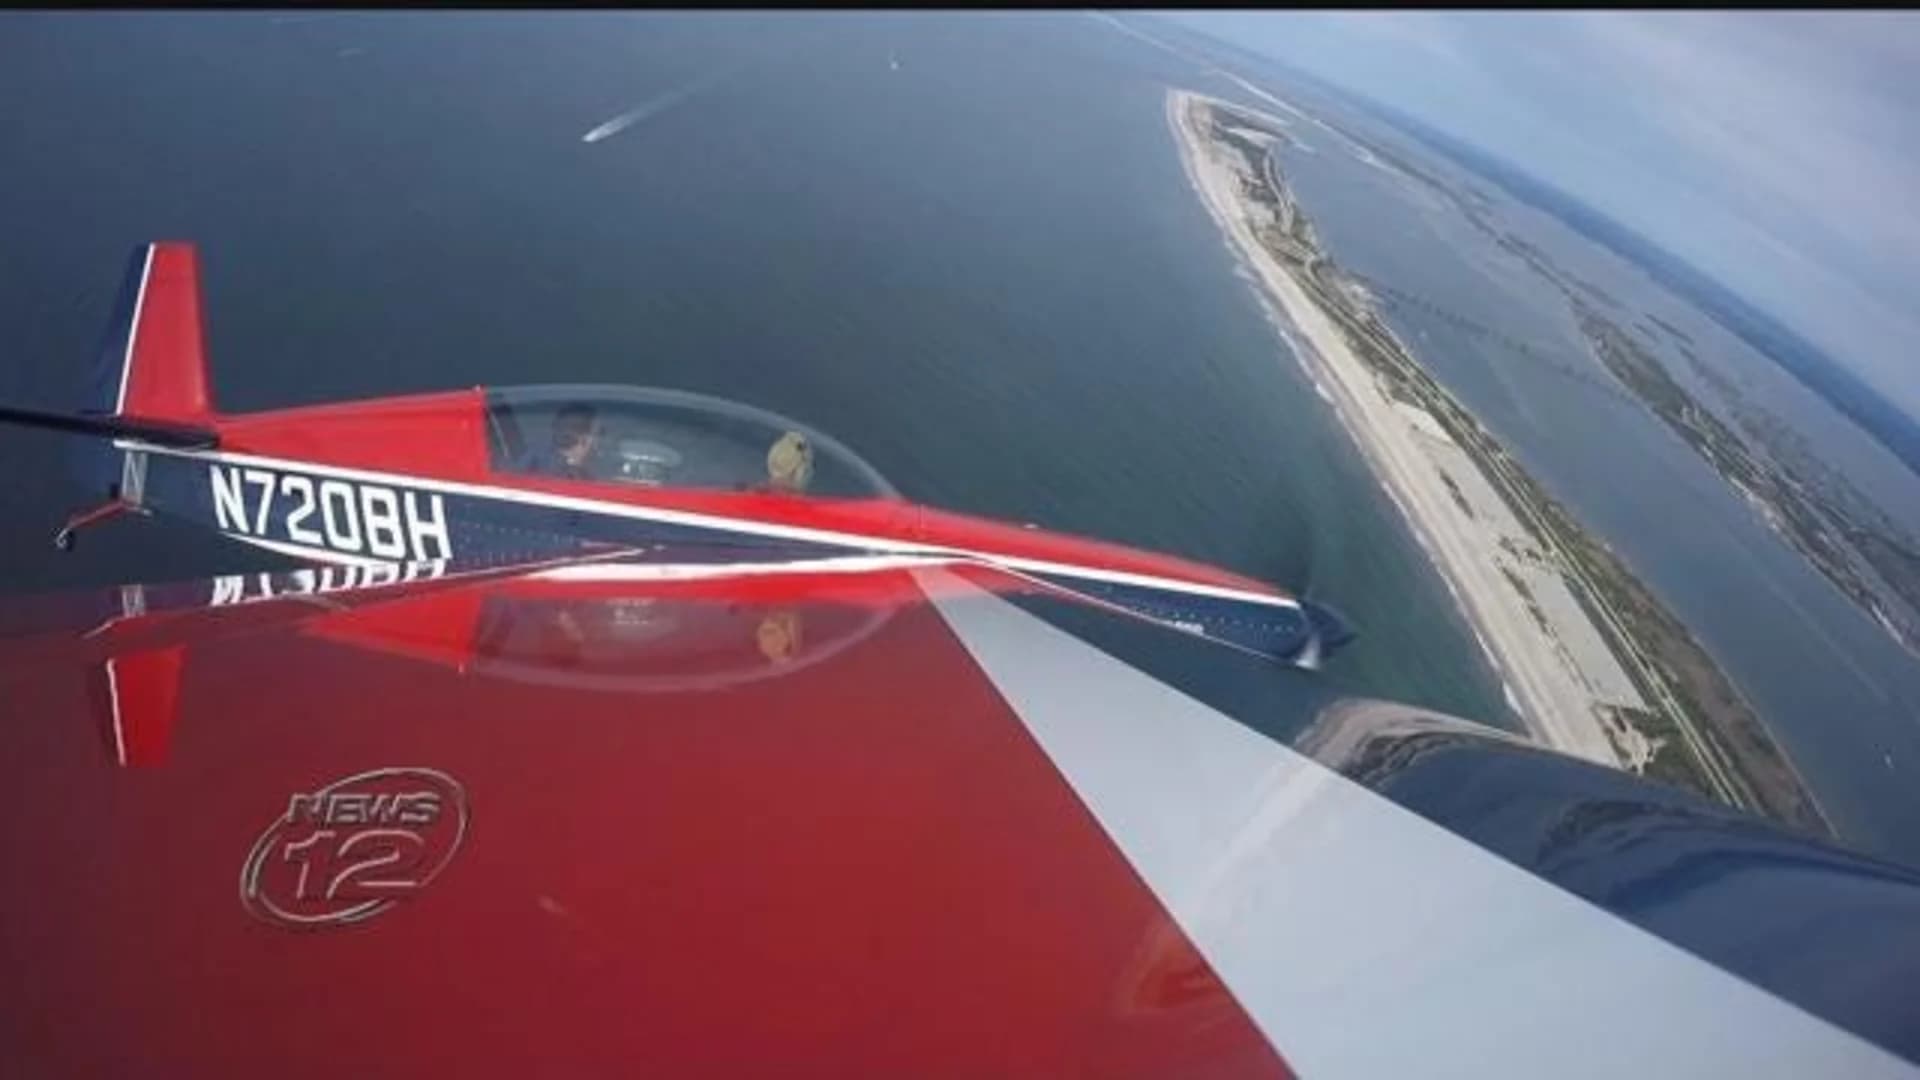 Stunt pilot shows off moves ahead of Bethpage Air Show